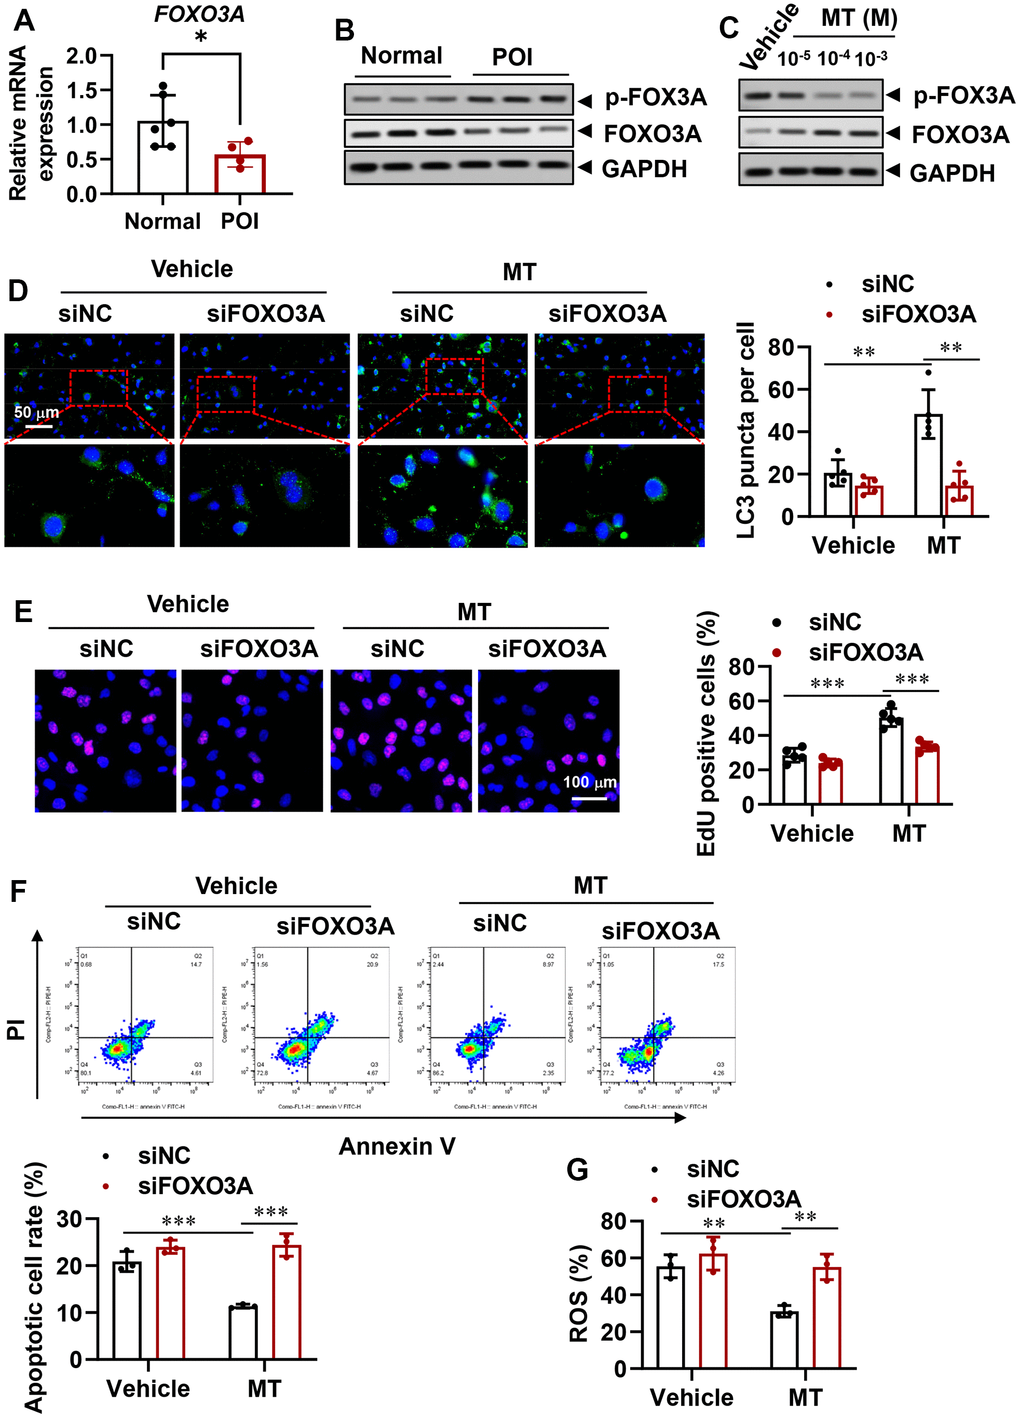 Reversal of autophagy insufficiency in POI-GCs by melatonin via forkhead box O-3A (FOXO3A) signaling. (A) Gene expression of FOXO3A in GCs from POI and normal patients (n = 4-6). (B) Representative WB results of FOXO3A in GCs from POI and normal patients (n = 3). (C) Representative WB of FOXO3A in POI-GCs after MT treatment (n = 3). (D) Representative IF staining and analysis of autophagy in POI-GCs after FOXO3A knockdown with or without MT (n = 5). (E) Representative EDU staining results and analysis for cell proliferation in POI-GCs after MT and siFOXO3A treatment (n = 5). Scale bar, 100 μm. (F) Flow cytometry analysis of apoptotic cell rates in POI-GCs after MT and siFOXO3A treatment (n = 4). (G) Analysis of ROS production in POI-GCs after MT and siFOXO3A treatment (n = 3). *p 